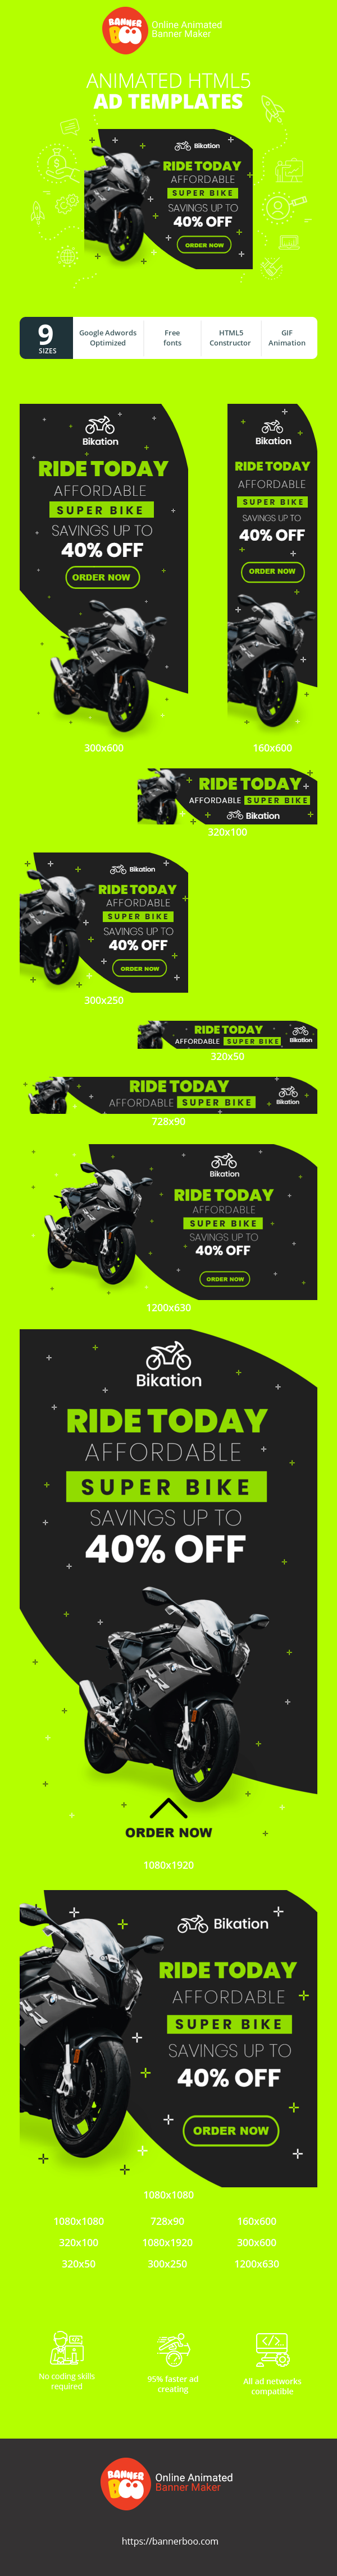 Banner ad template — Ride Today — Affordable Super Bike Save Up To 40% Off